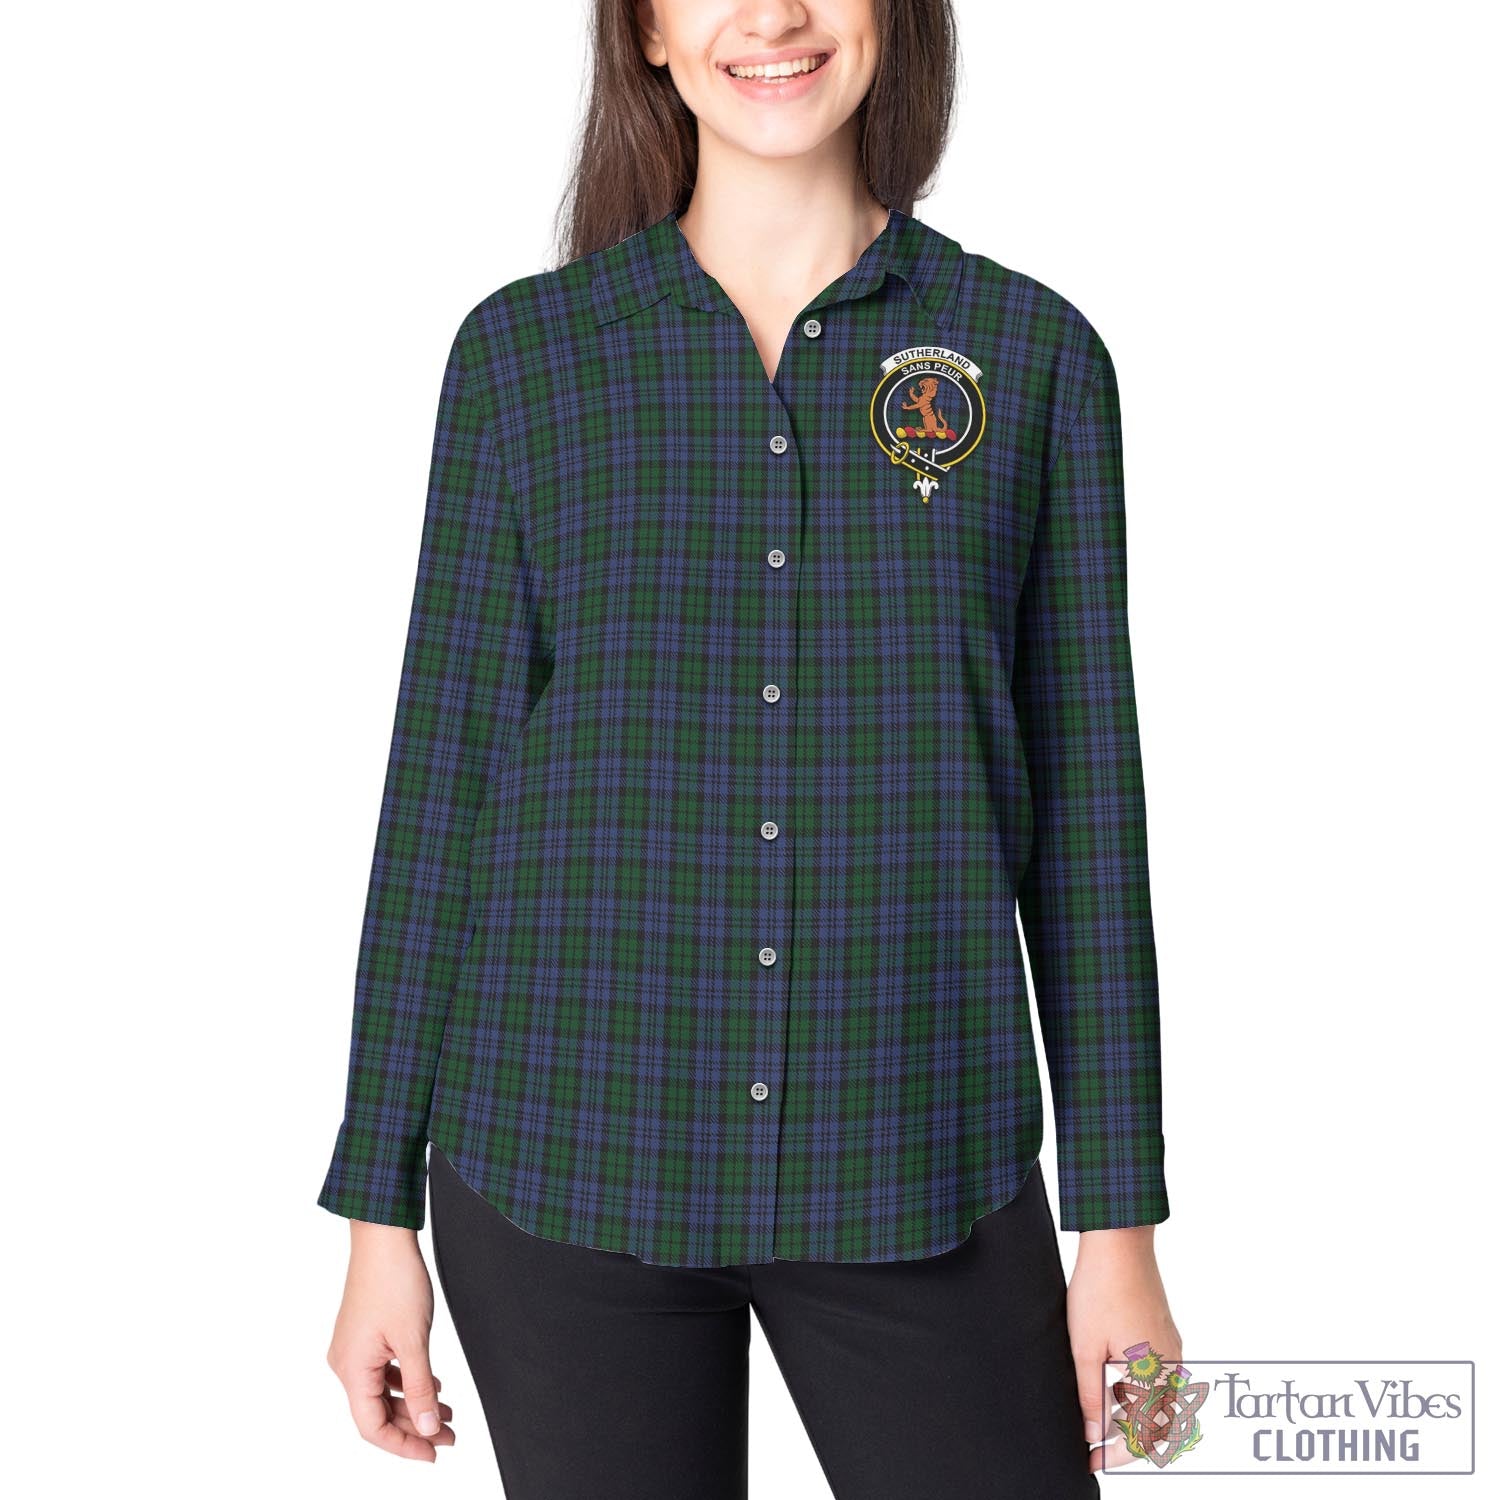 Tartan Vibes Clothing Sutherland Tartan Womens Casual Shirt with Family Crest